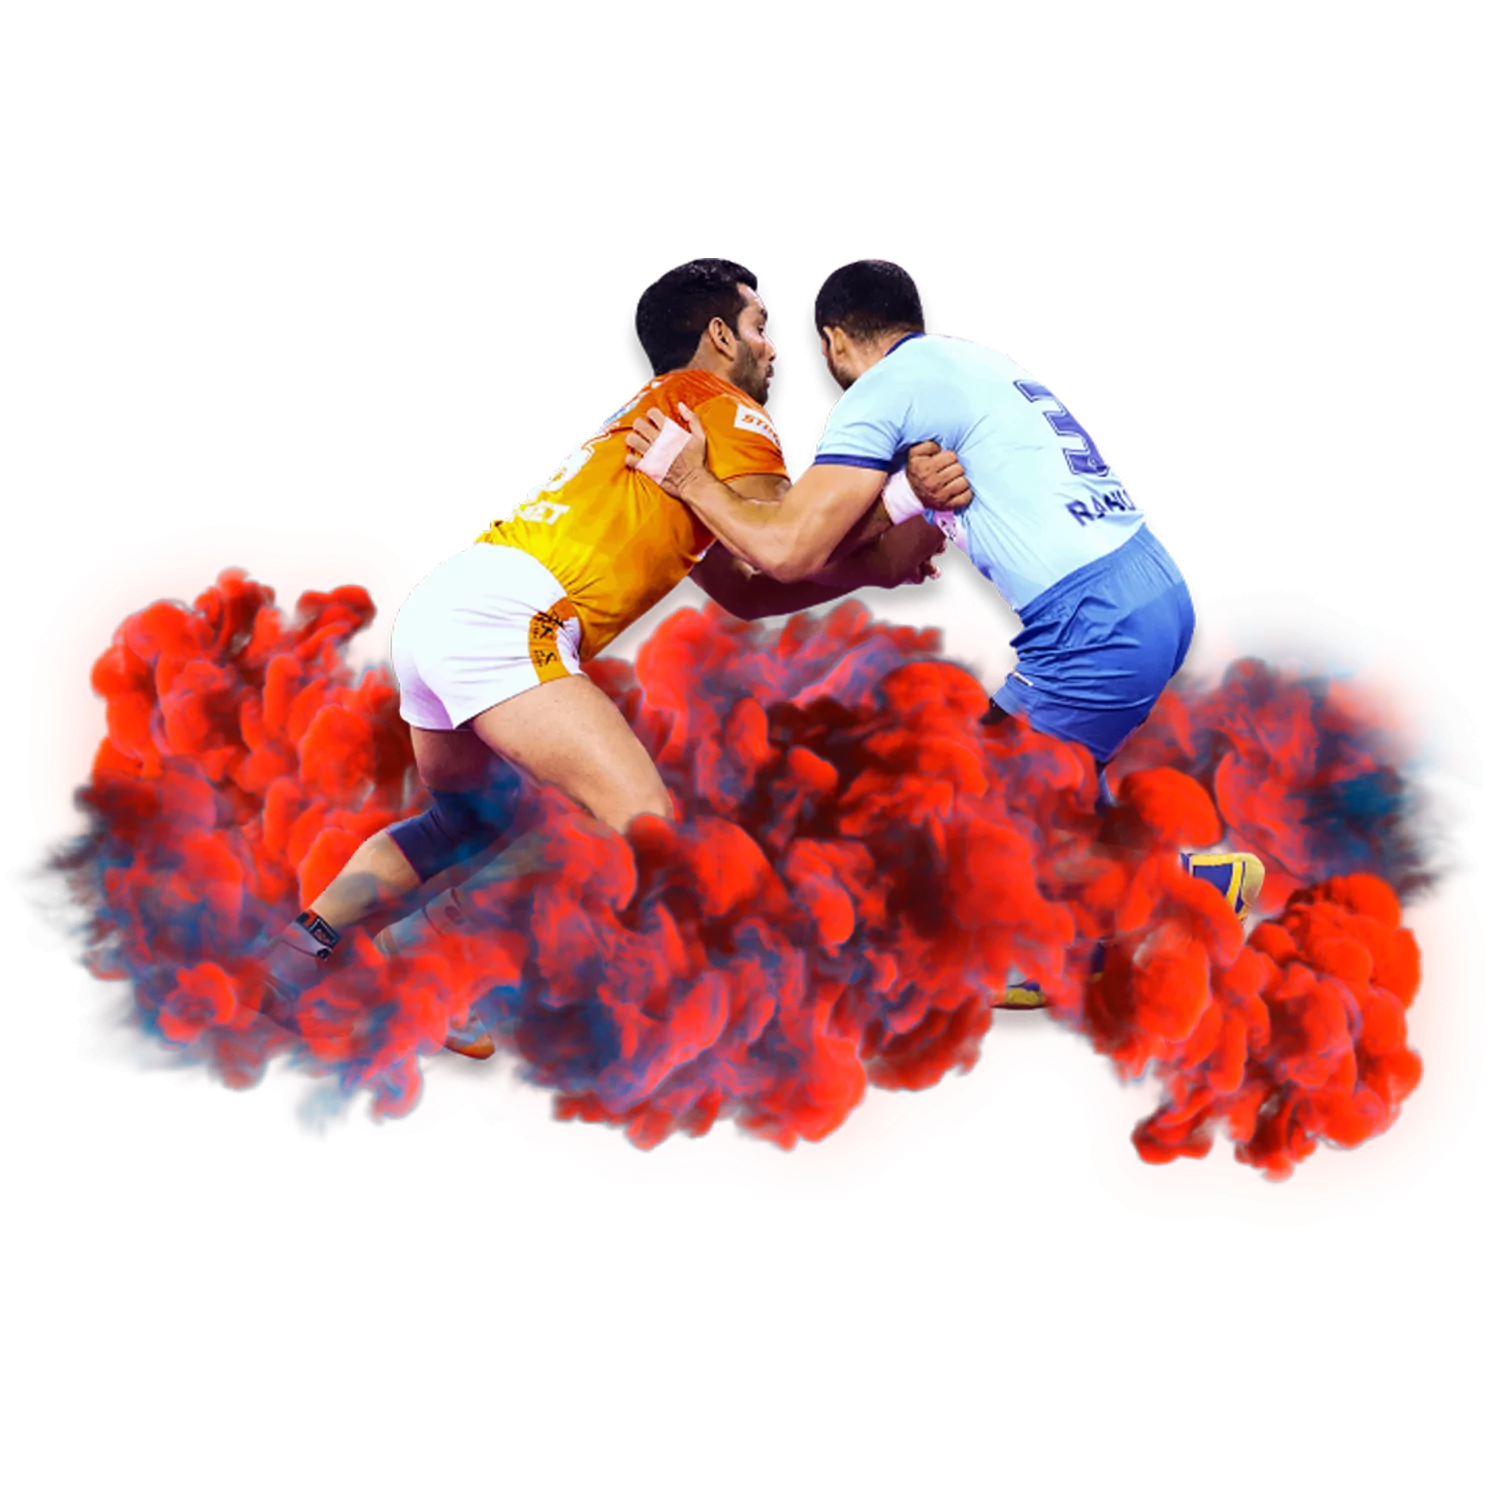 At the Online Kabaddi, you read the last sports news and tips on how to bet profitably.